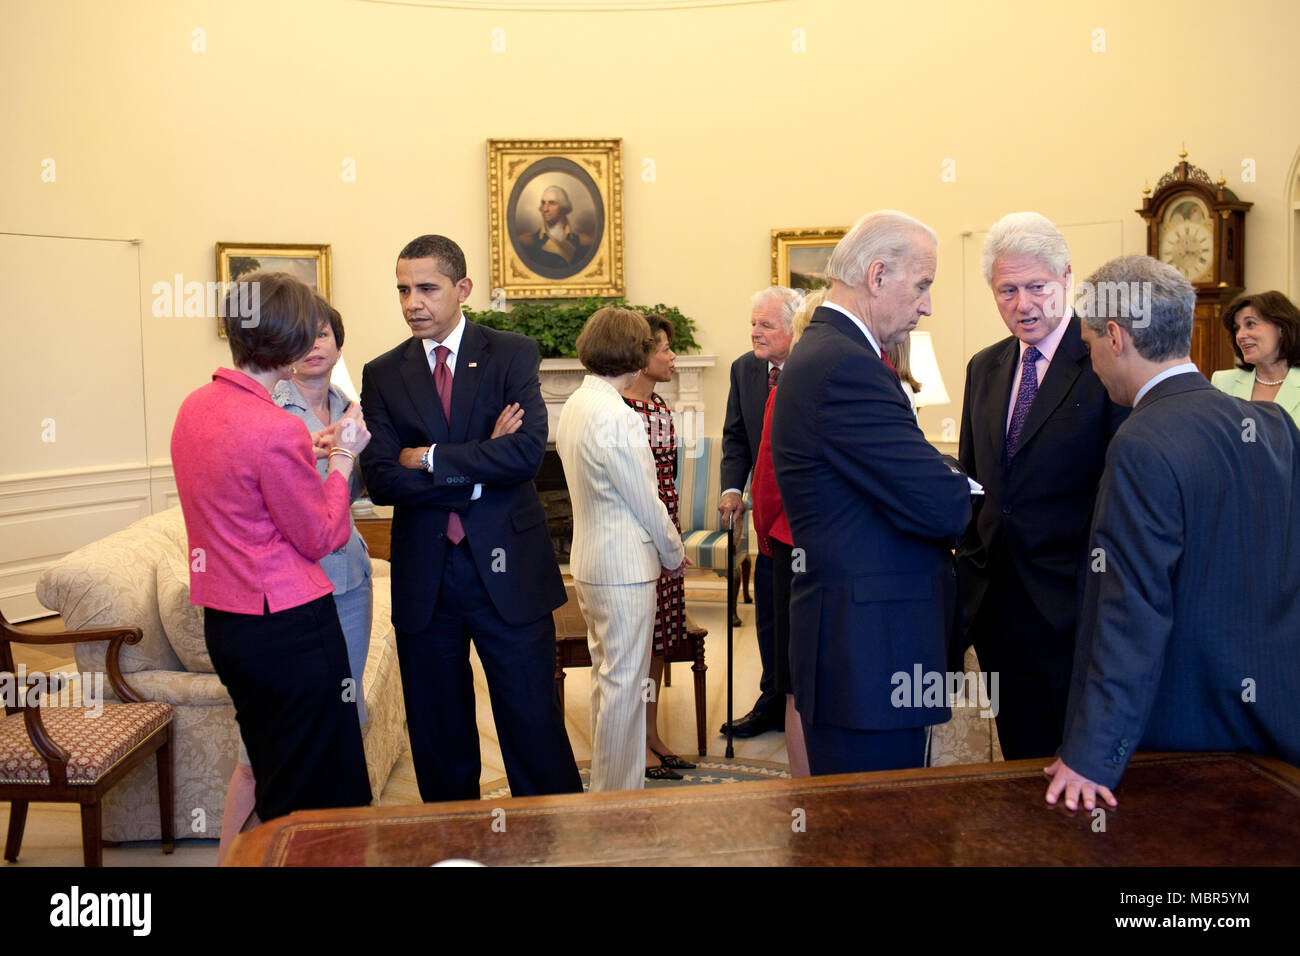 President Barack Obama  and First Lady Michelle Obama at a reception in the Oval Office with President Clinton, Senator Ted Kennedy ,VP Biden and other guests prior to signing of the Kennedy Service Act  4/21/09..Official White House Photo by Pete Souza Stock Photo